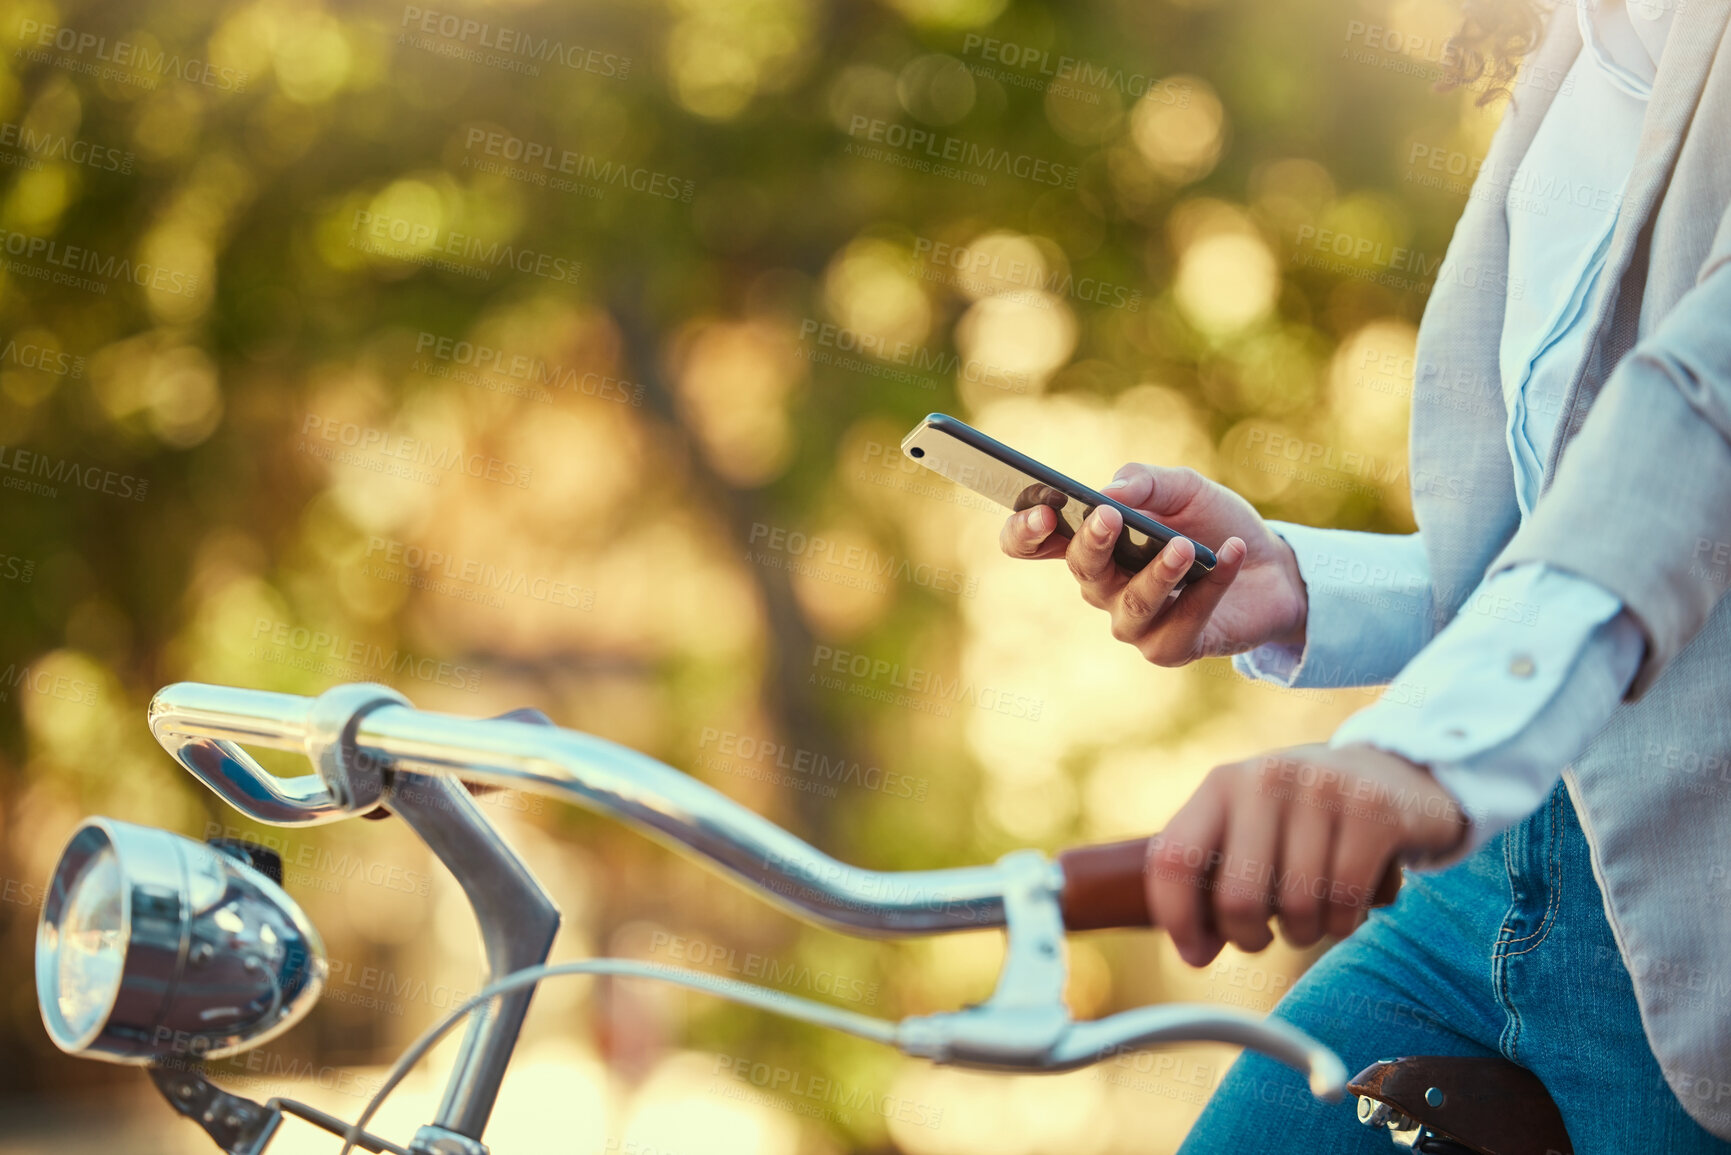 Buy stock photo Hands of a girl, on bicycle and using smartphone app, social media and doing a internet or web search closeup. Woman uses her bike for health, fun or travel by cycling to park, work and home or city